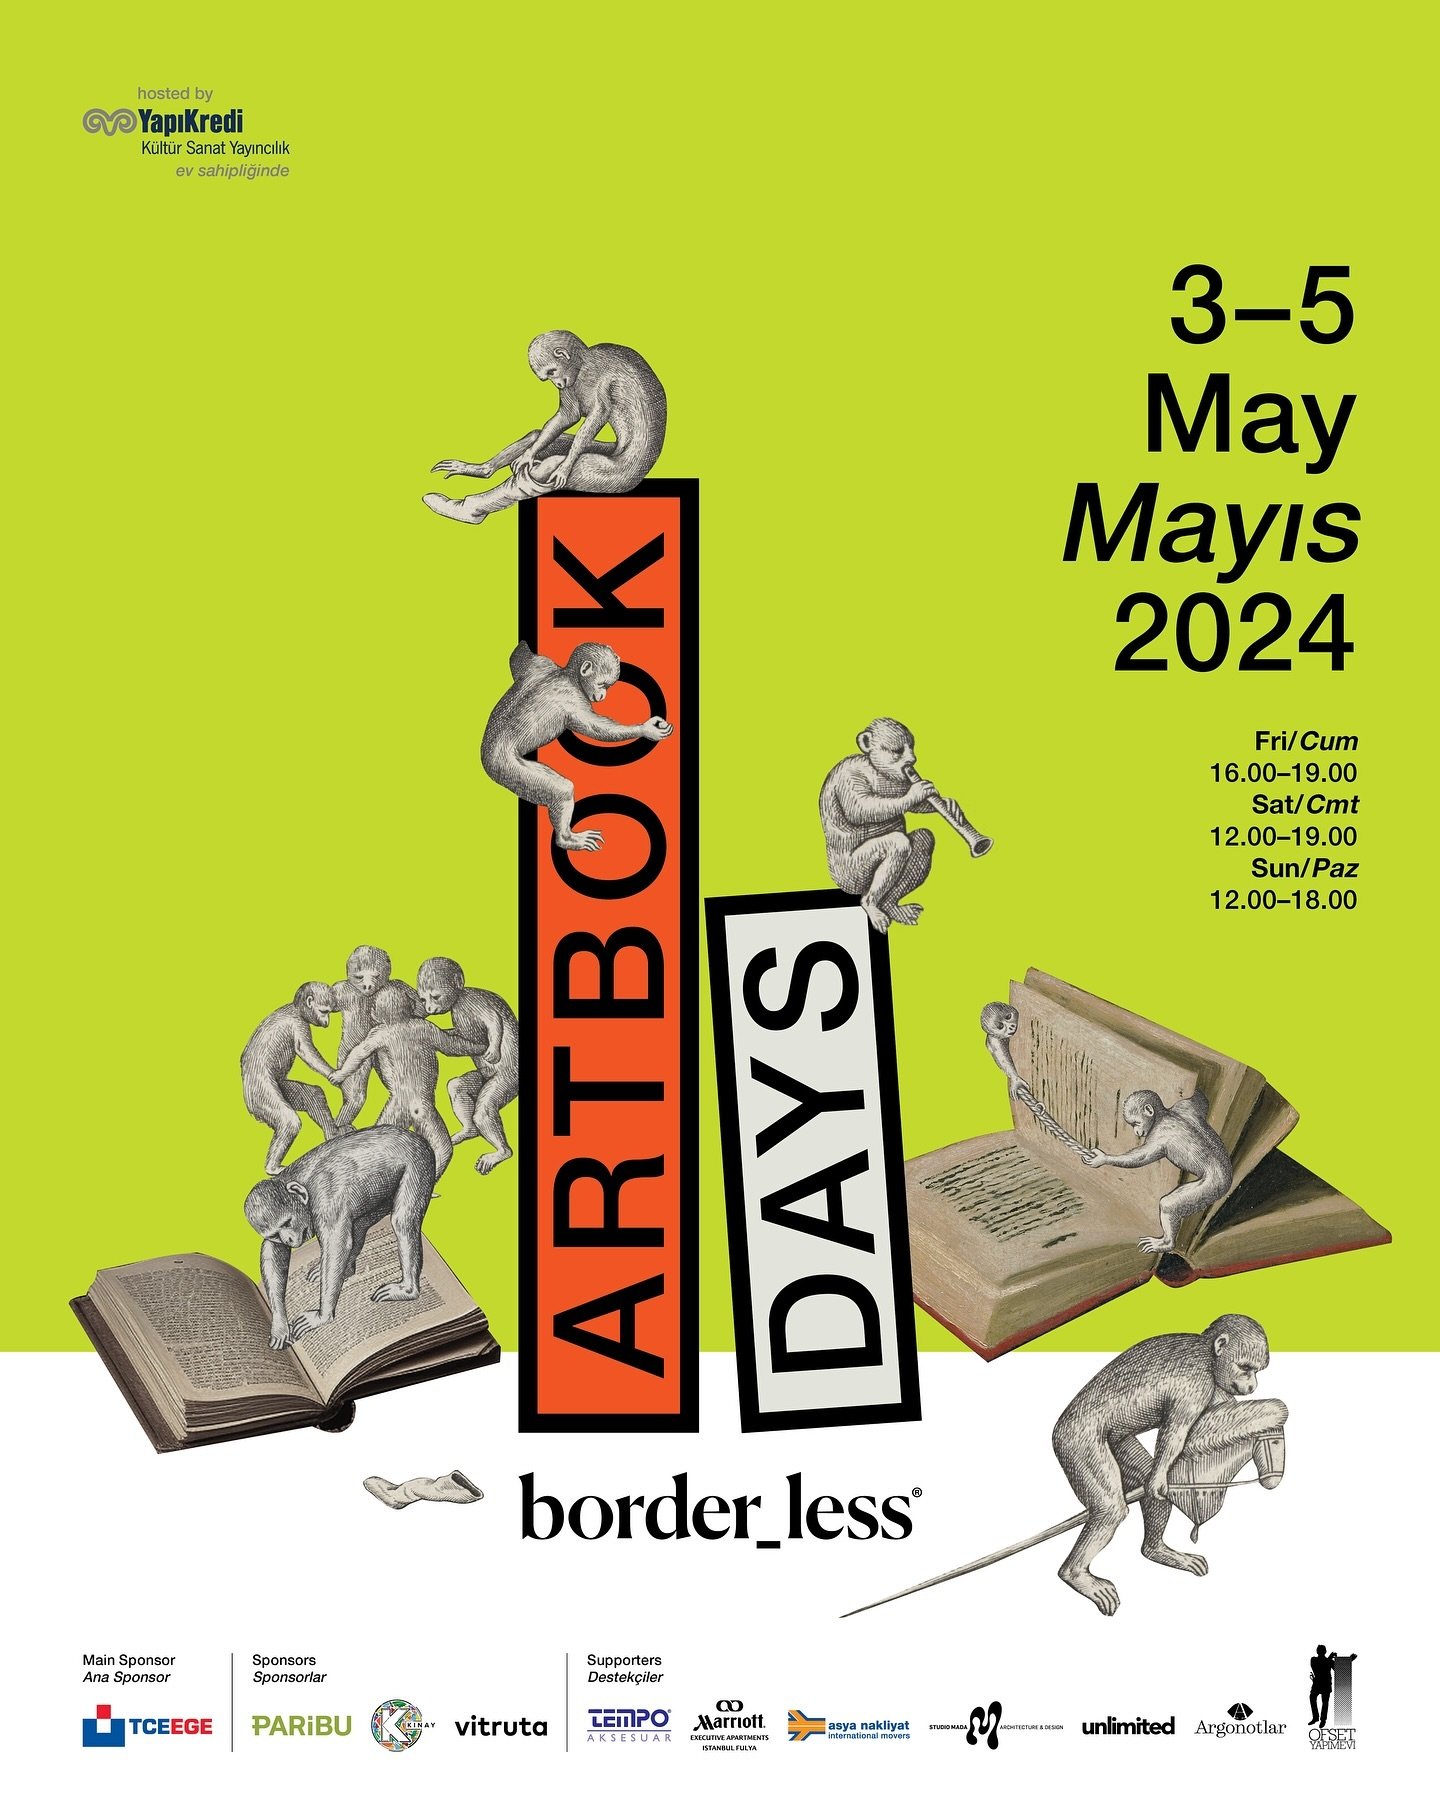 Soon! The first thing to do in May will be heading to Istanbul for @border_lessartbookdays 
The event will take place on May 3&mdash;5 @yapikredikultursanat See you in Turkiye :)

메이커메이커의 5월 첫 투어는 이스탄불, 터키입니다. @border_lessartbookdays 는 5월 3일부터 5월 5일까